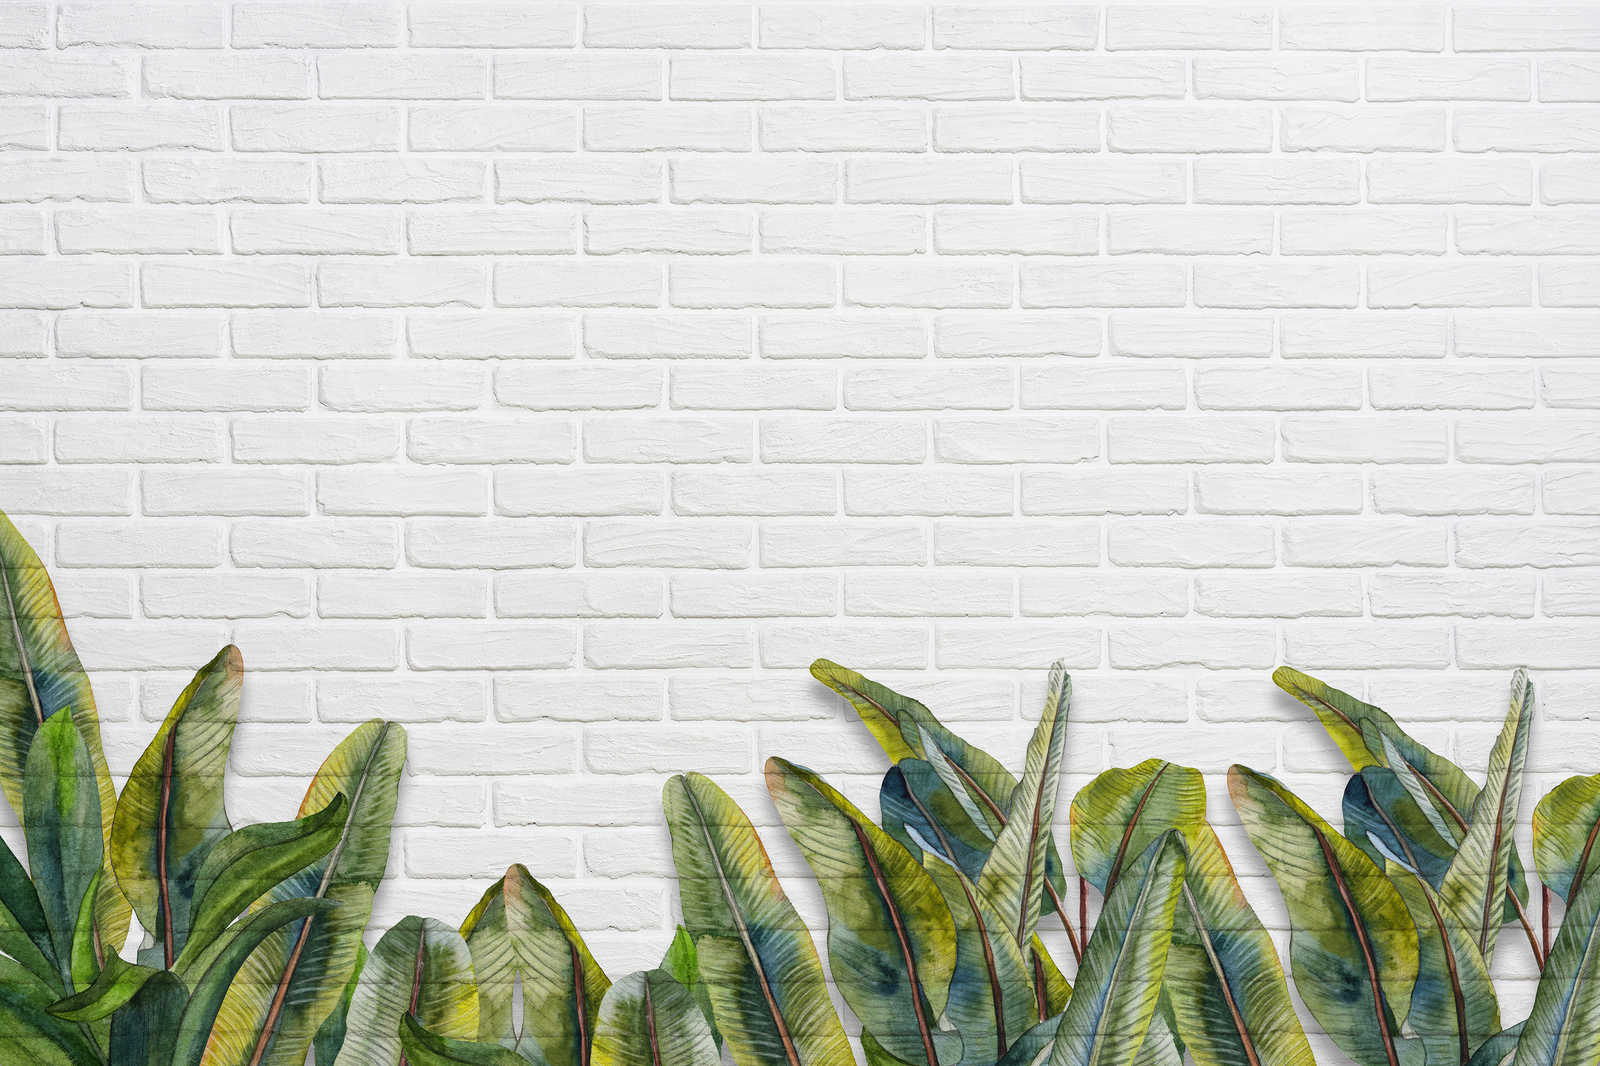             Canvas painting with leaves in front of white brick wall - 0.90 m x 0.60 m
        